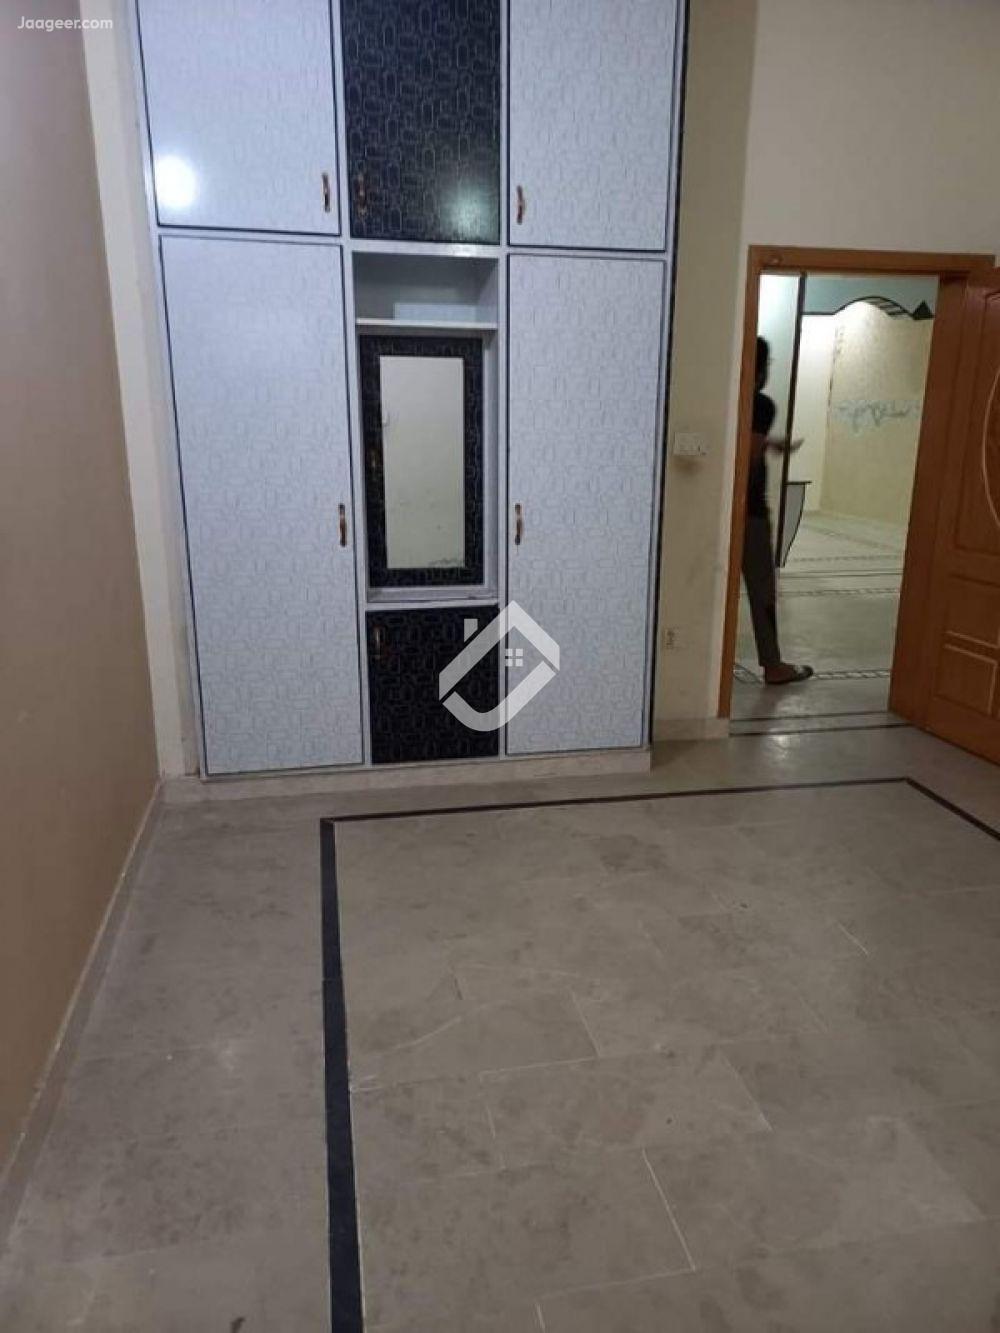 View  5 Marla Upper Portion House For Rent In Ghauri Town  in Ghauri Town, Islamabad